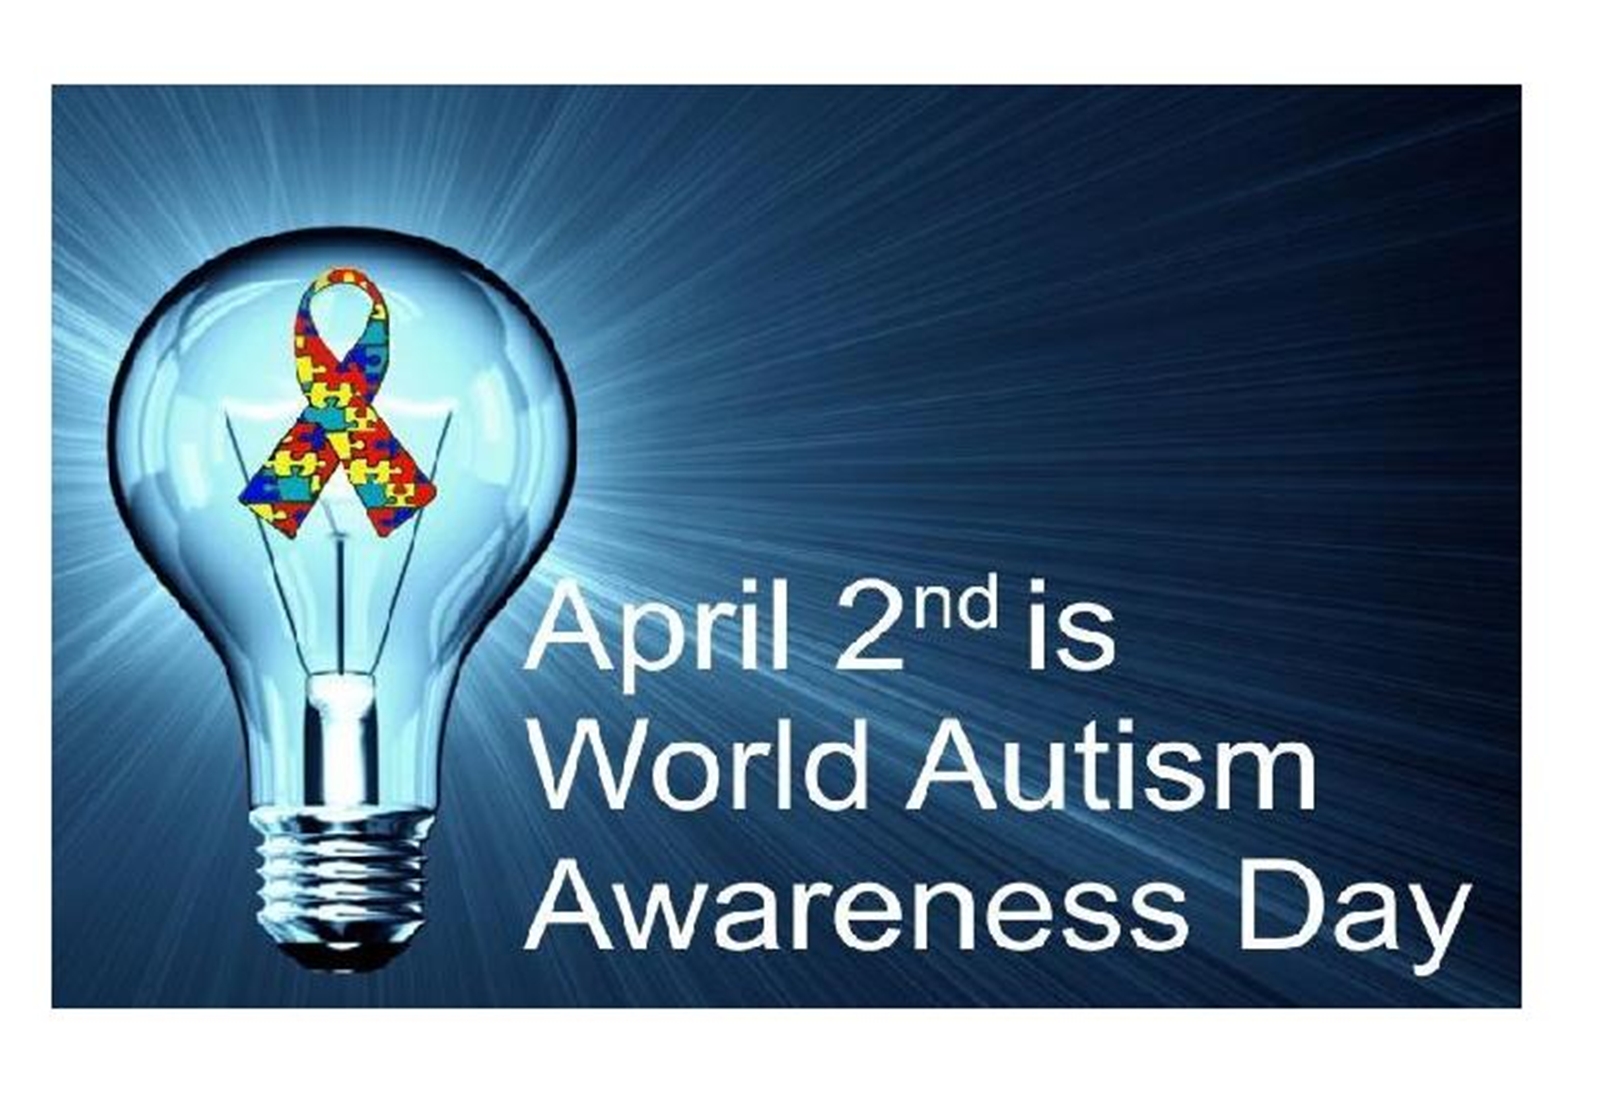 april 2nd is World Autism Awareness Day